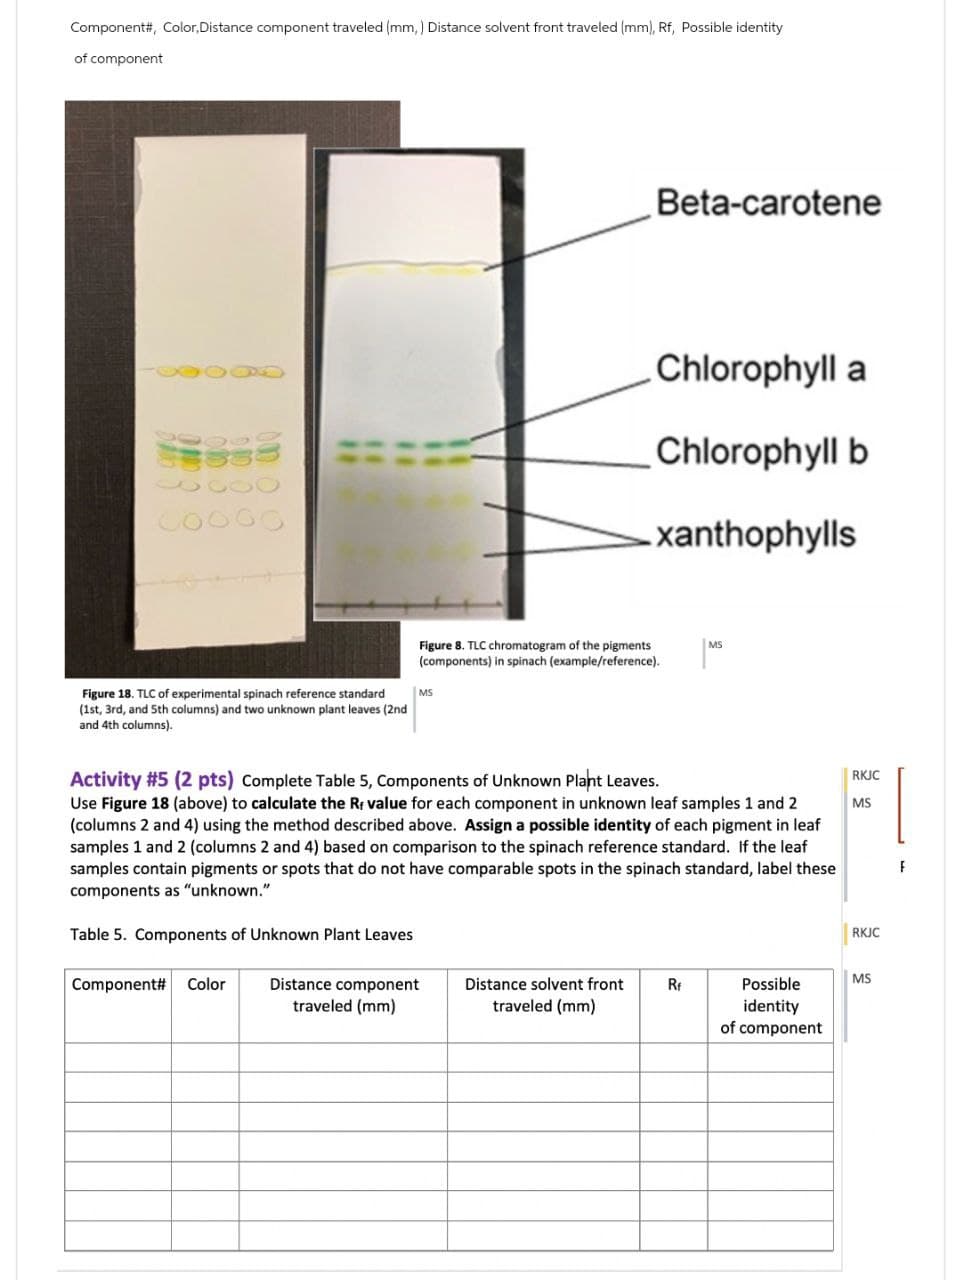 Component#, Color, Distance component traveled (mm) Distance solvent front traveled (mm), Rf, Possible identity
of component
000
Beta-carotene
Chlorophyll a
Chlorophyll b
xanthophylls
Figure 8. TLC chromatogram of the pigments
(components) in spinach (example/reference).
MS
Figure 18. TLC of experimental spinach reference standard
(1st, 3rd, and 5th columns) and two unknown plant leaves (2nd
and 4th columns).
MS
Activity #5 (2 pts) Complete Table 5, Components of Unknown Plant Leaves.
Use Figure 18 (above) to calculate the Rr value for each component in unknown leaf samples 1 and 2
(columns 2 and 4) using the method described above. Assign a possible identity of each pigment in leaf
samples 1 and 2 (columns 2 and 4) based on comparison to the spinach reference standard. If the leaf
samples contain pigments or spots that do not have comparable spots in the spinach standard, label these
components as "unknown."
Table 5. Components of Unknown Plant Leaves
RKJC
MS
RKJC
F
Component# Color
Distance component
traveled (mm)
Distance solvent front
Rf
traveled (mm)
Possible
identity
of component
MS